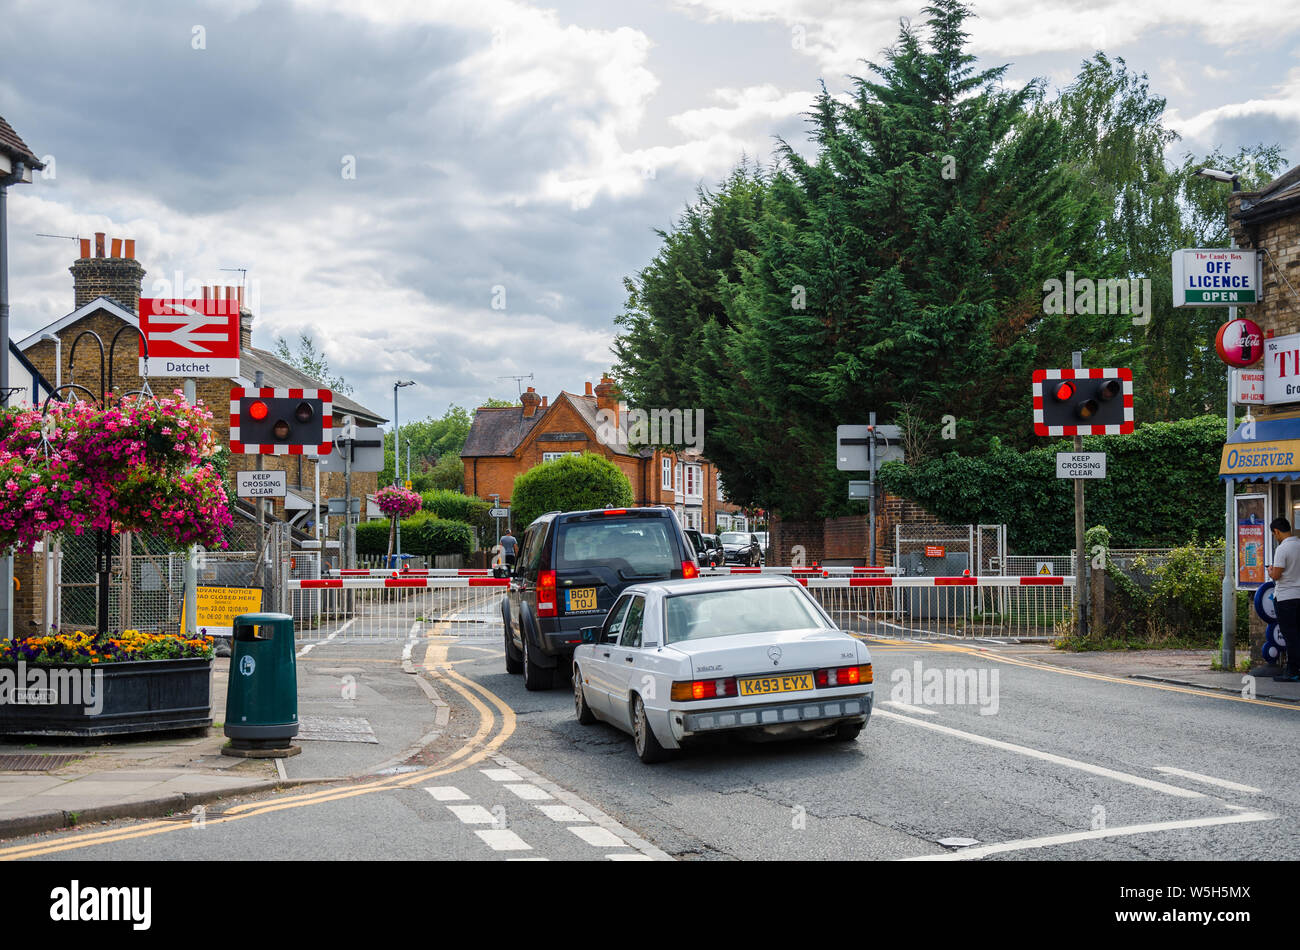 Cars wait at a level crossing at Datchet Railway Station as the barriers are down and warning lights are flashing as a passing train is imminent. Stock Photo